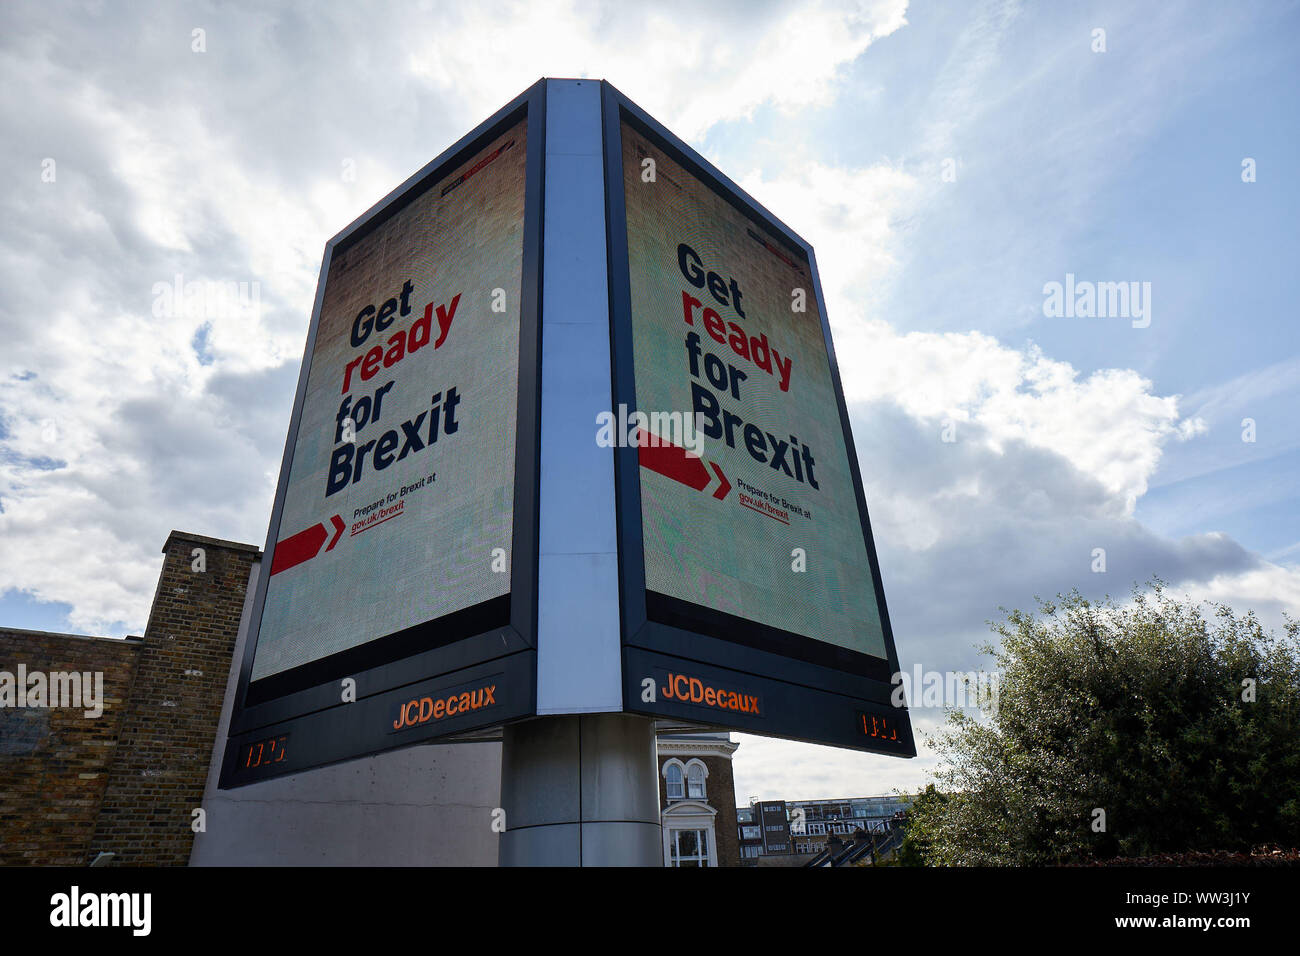 London, U.K. - September 10, 2019: An illuminated double-sided advert at Holland Park roundabout as part of the new government campaign calling for people to prepare for Brexit. Stock Photo